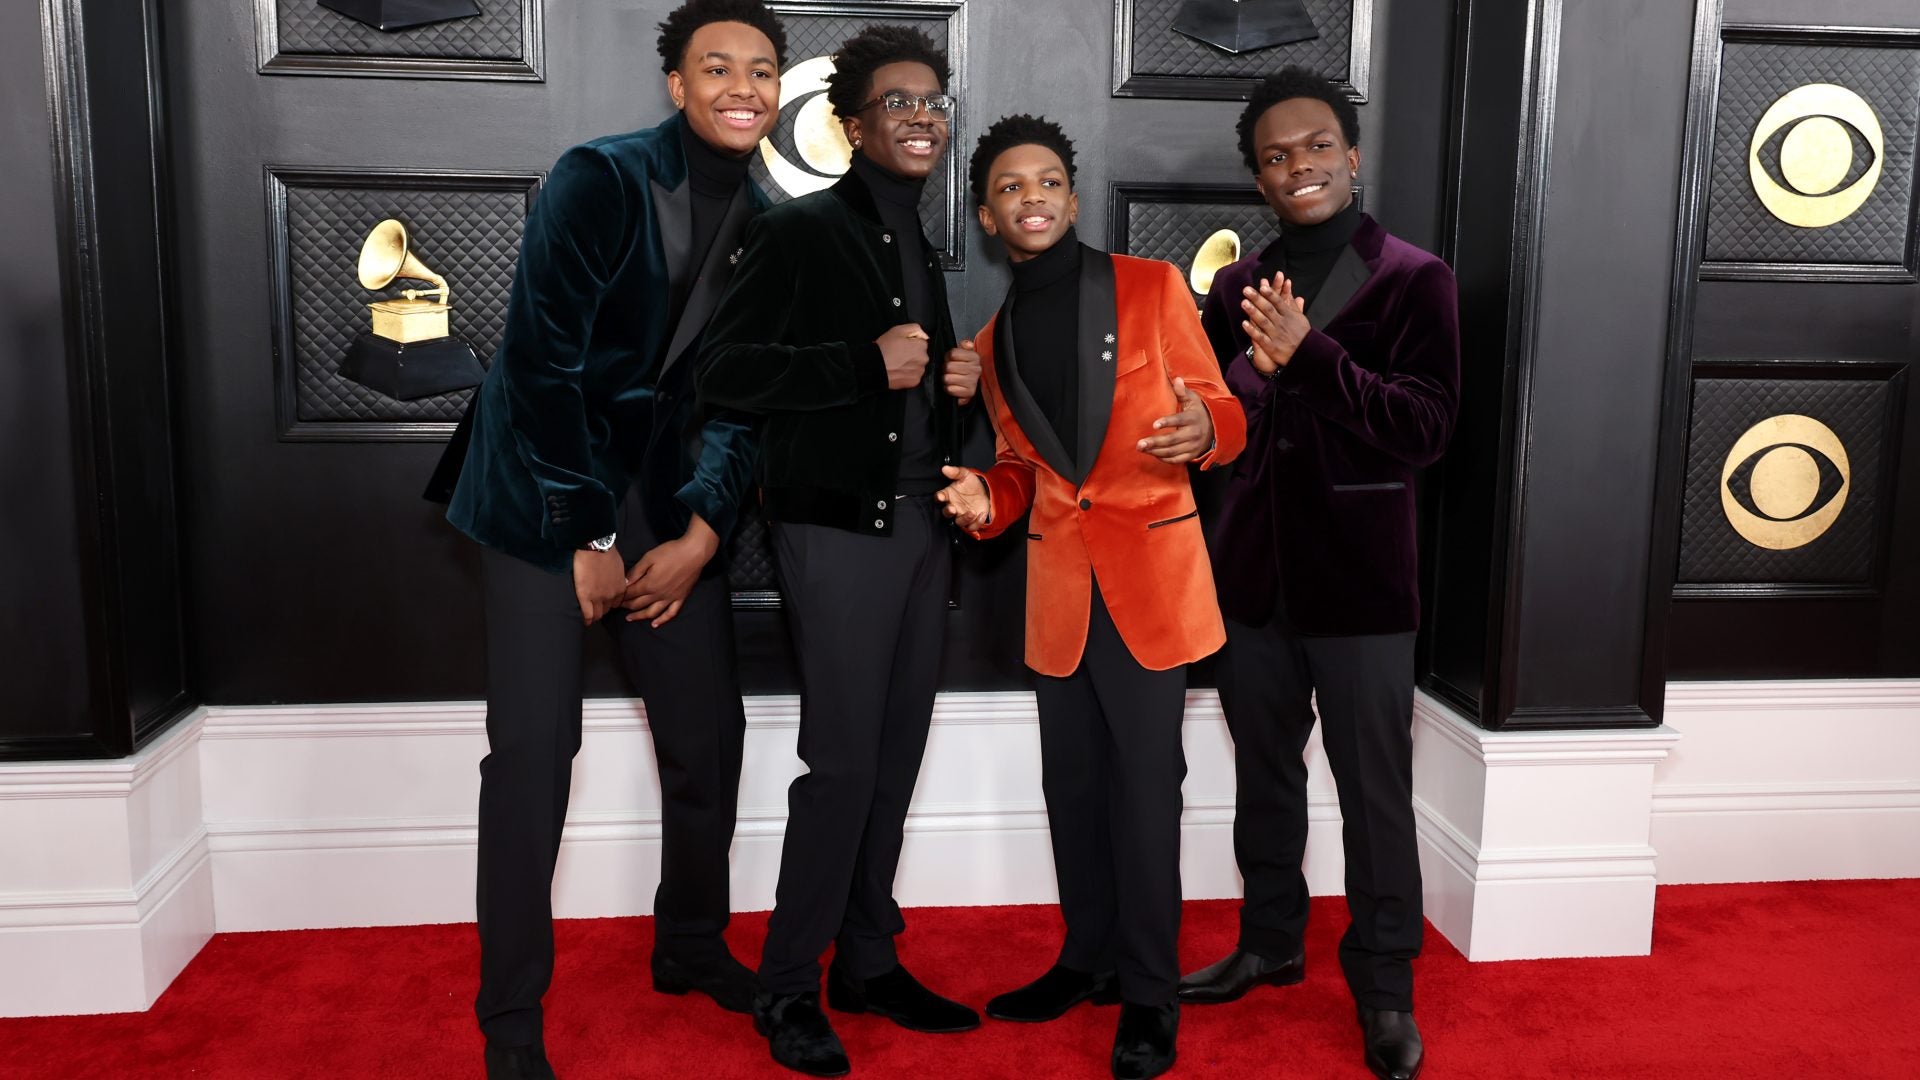 WanMor, The Sons Of Boyz II Men’s Wanya Morris, Had A Time At The Grammys